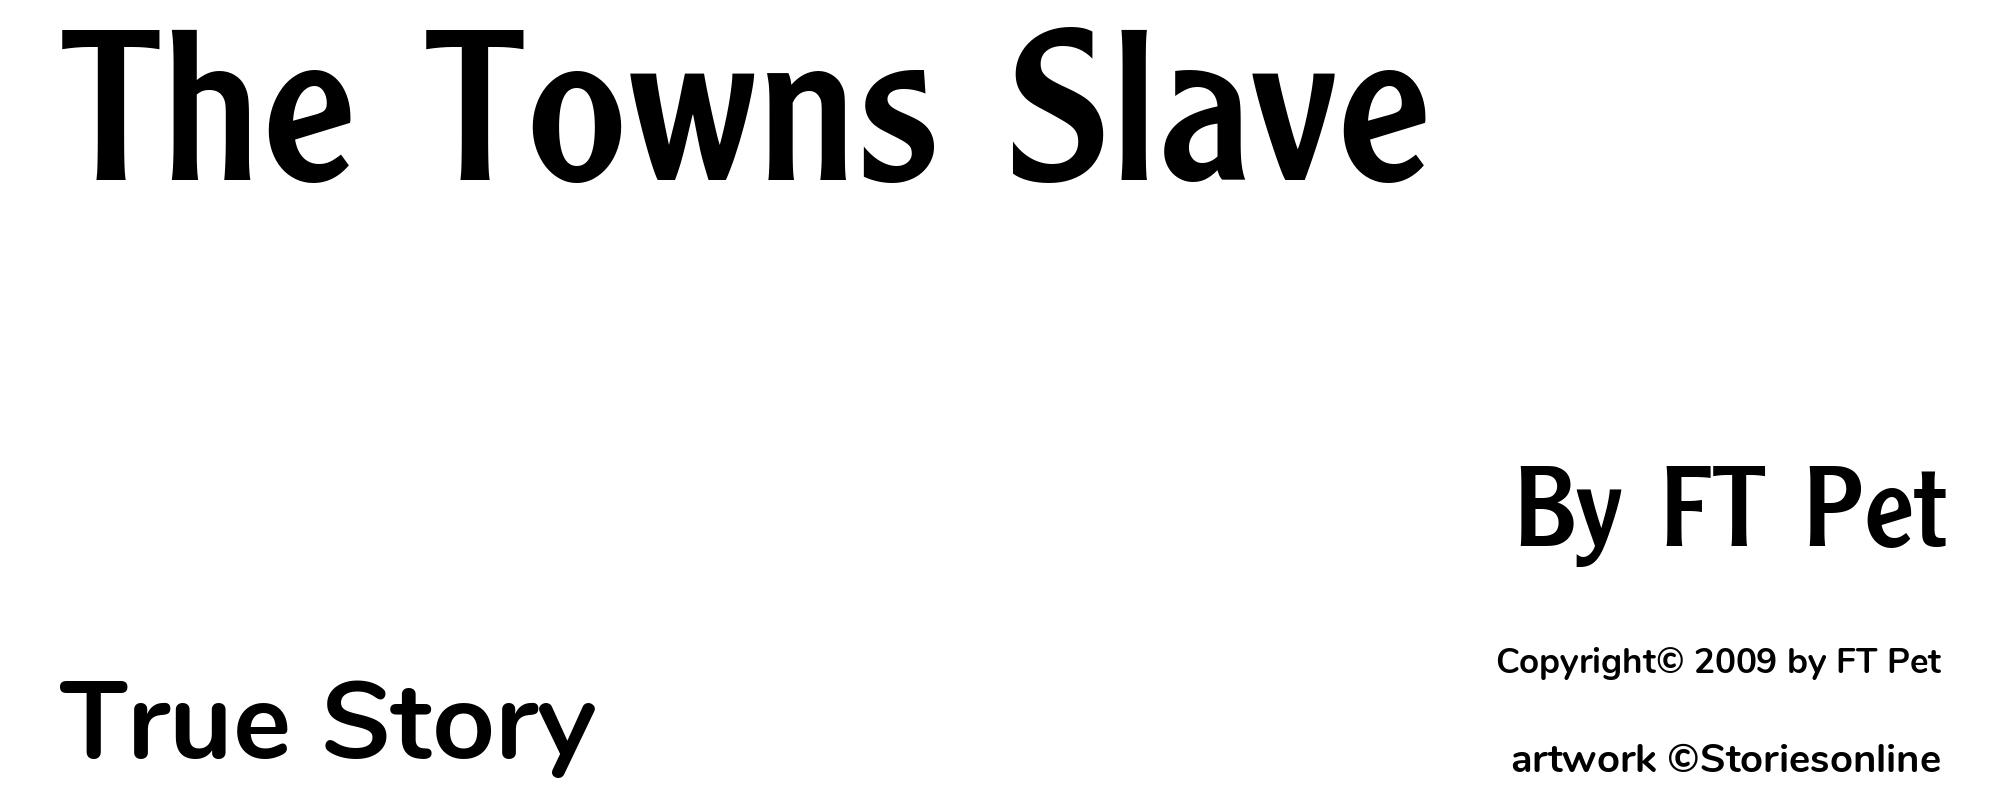 The Towns Slave - Cover